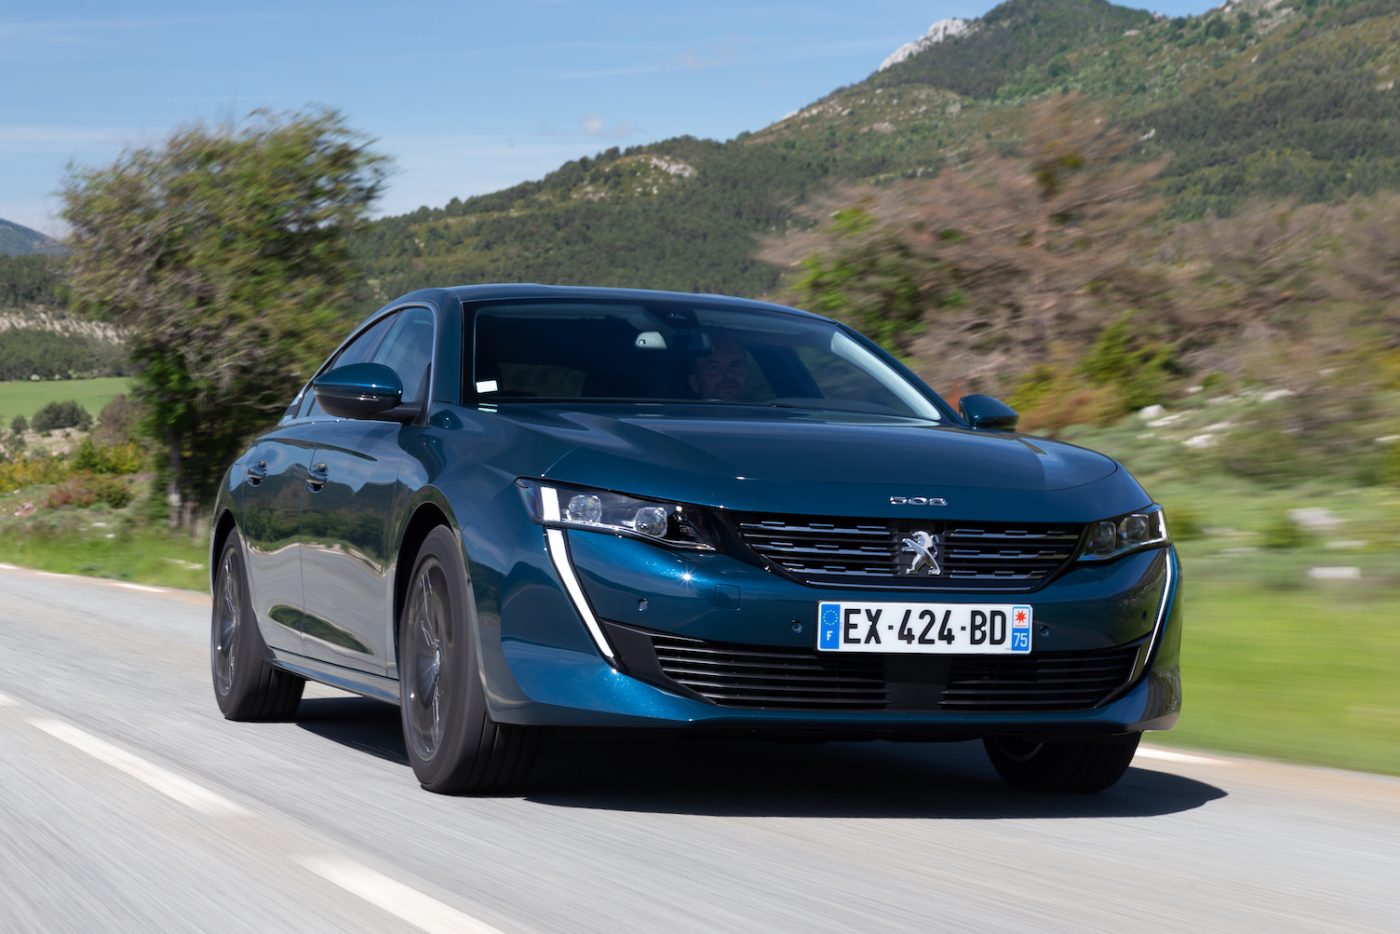 First Drive: Peugeot 508 Allure 1.5 Blue HDI - Company Car Today